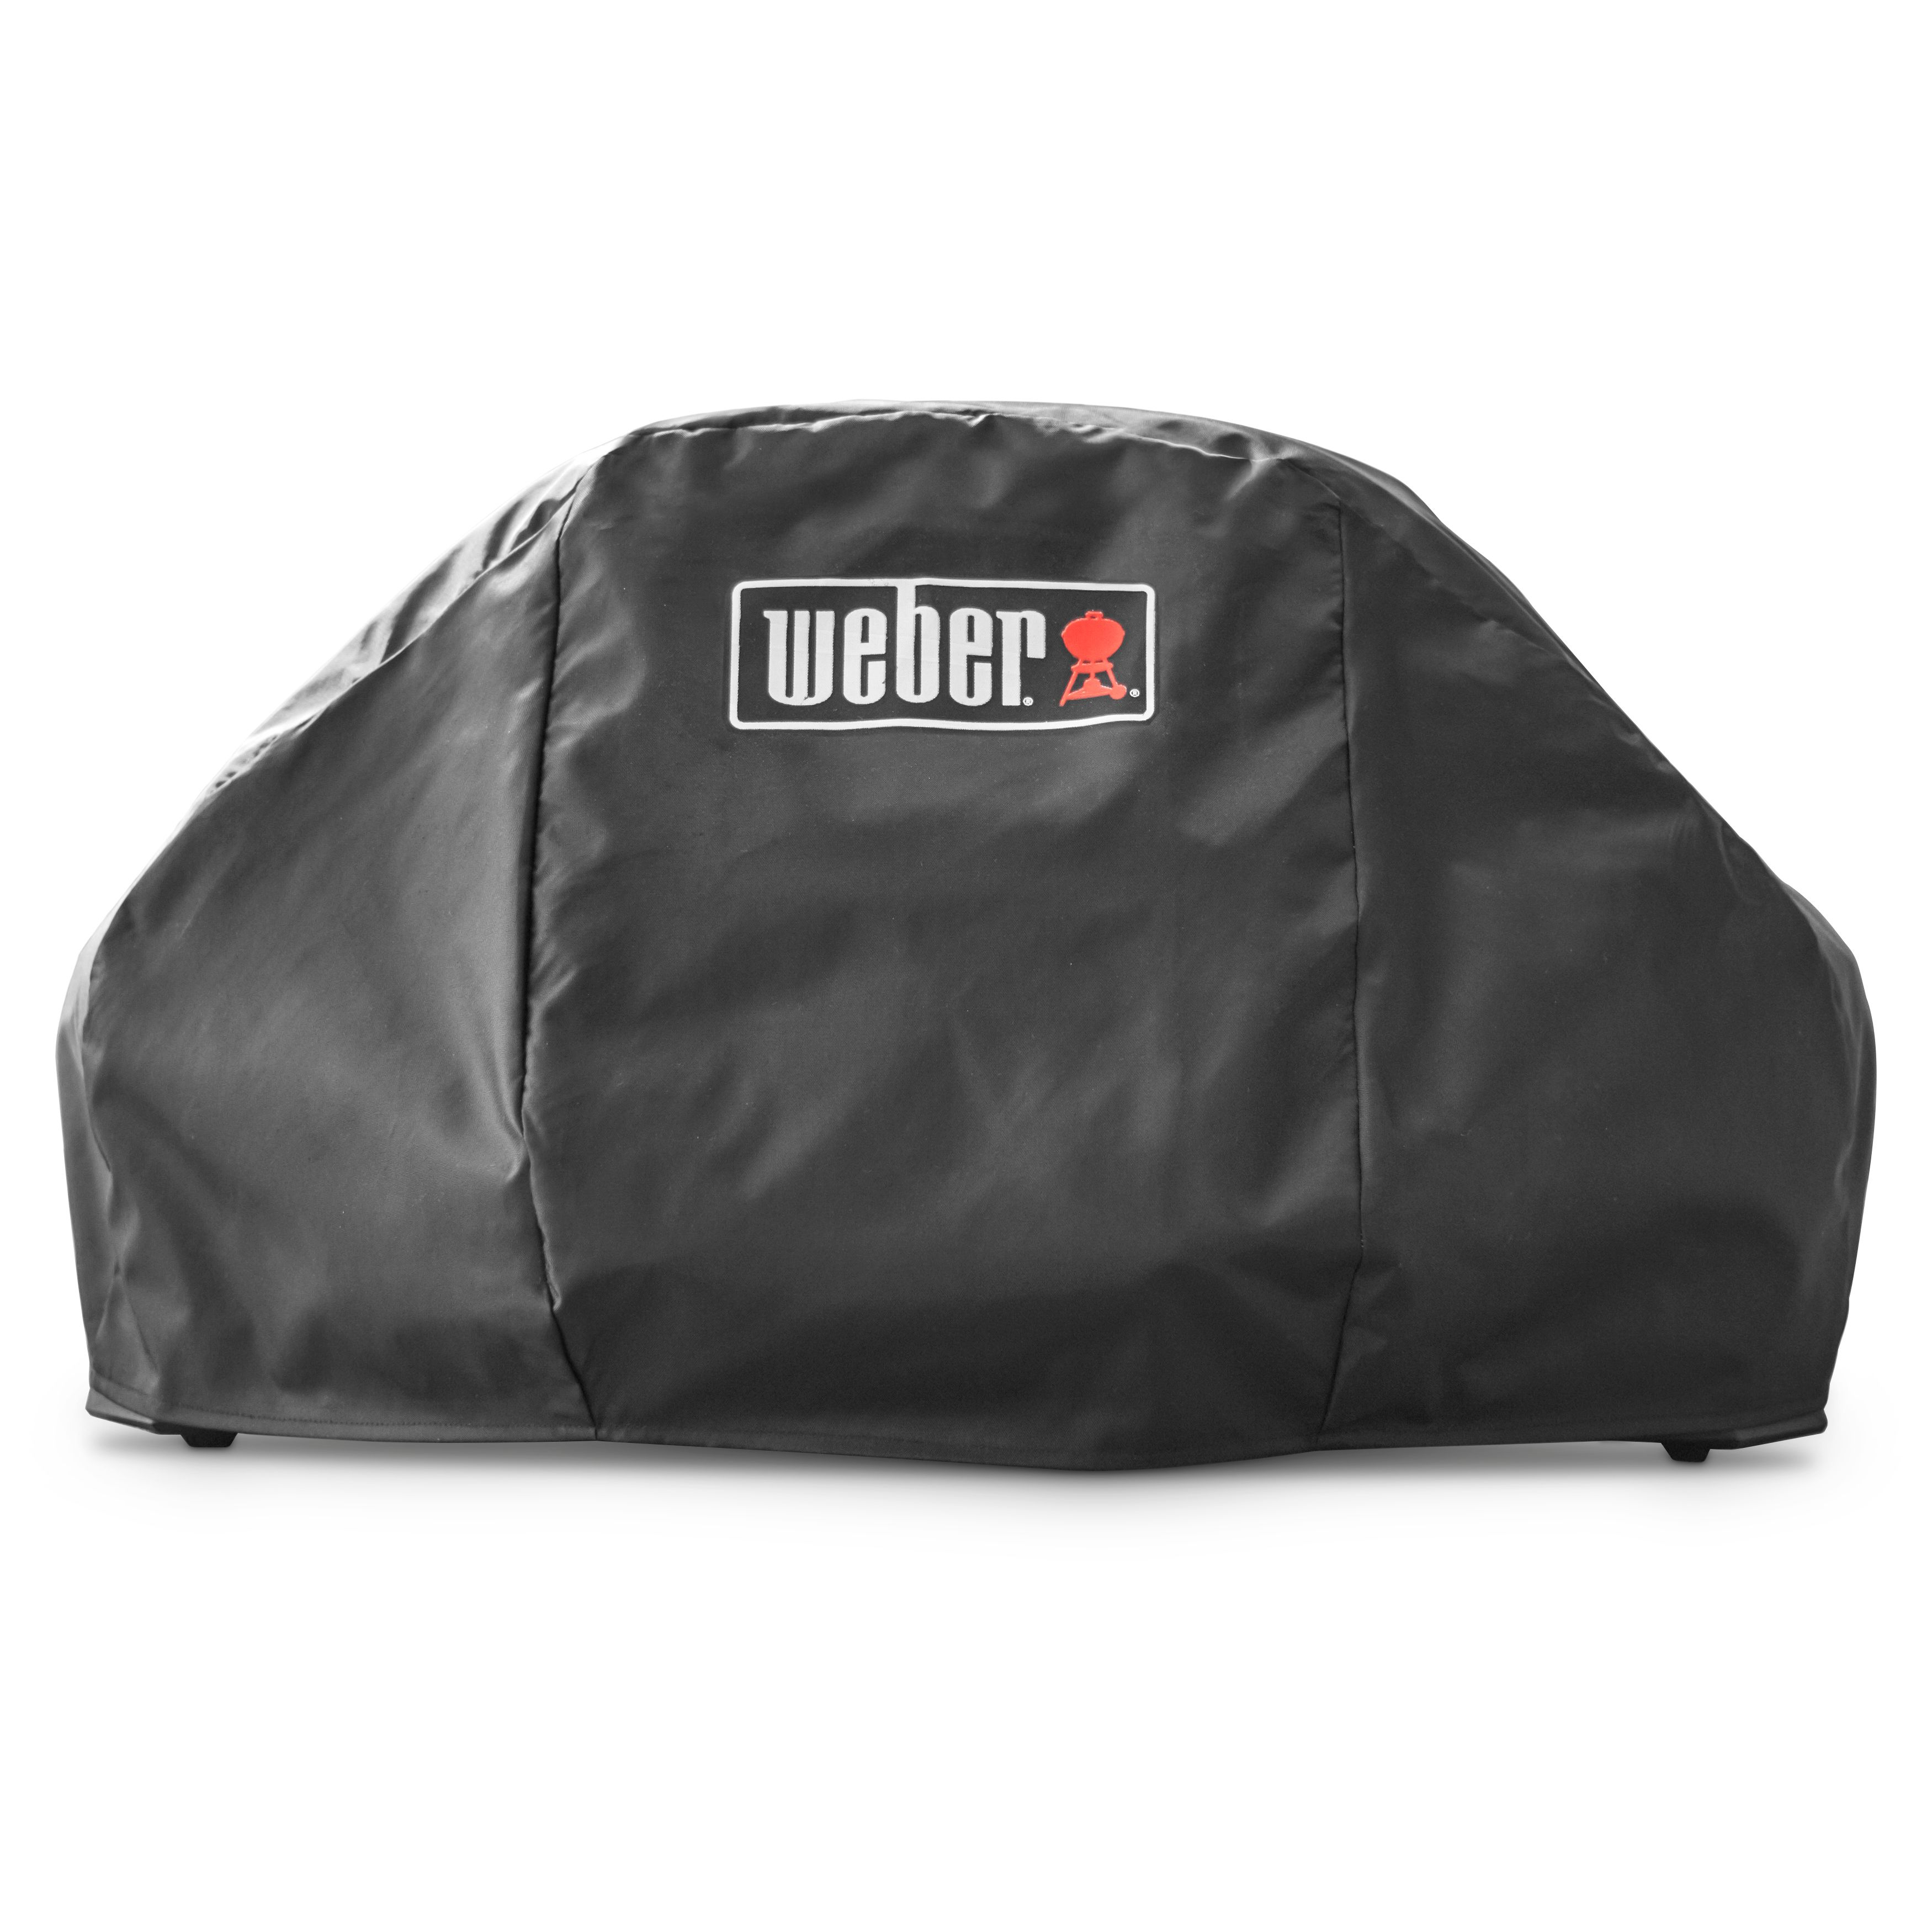 Weber Pulse 2000 Electric Barbecue